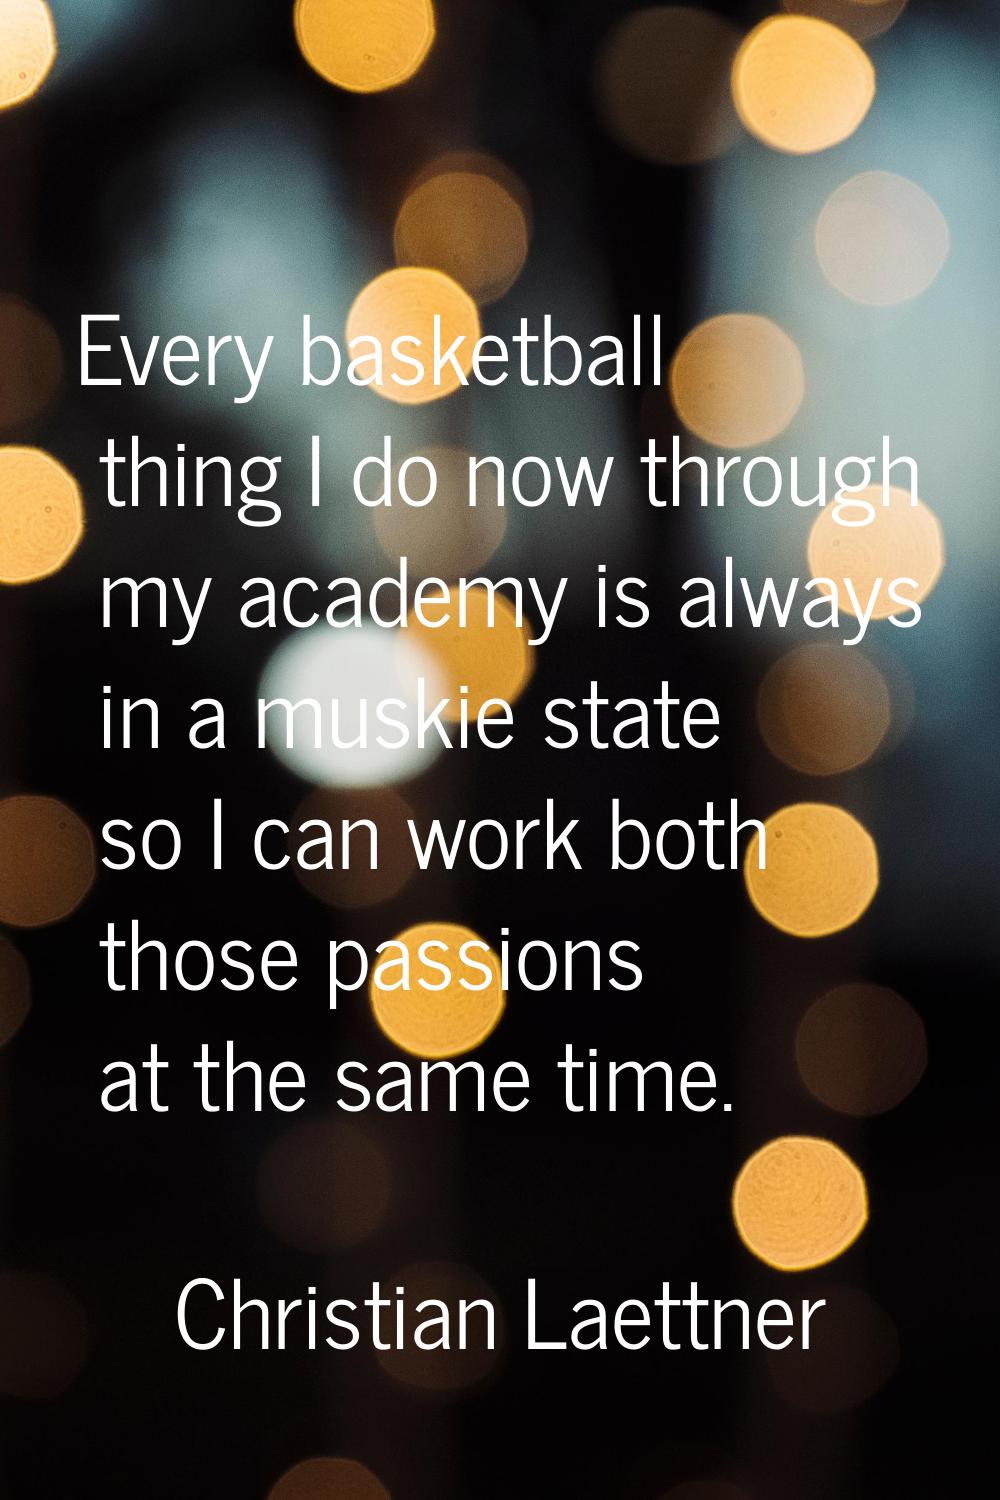 Every basketball thing I do now through my academy is always in a muskie state so I can work both t